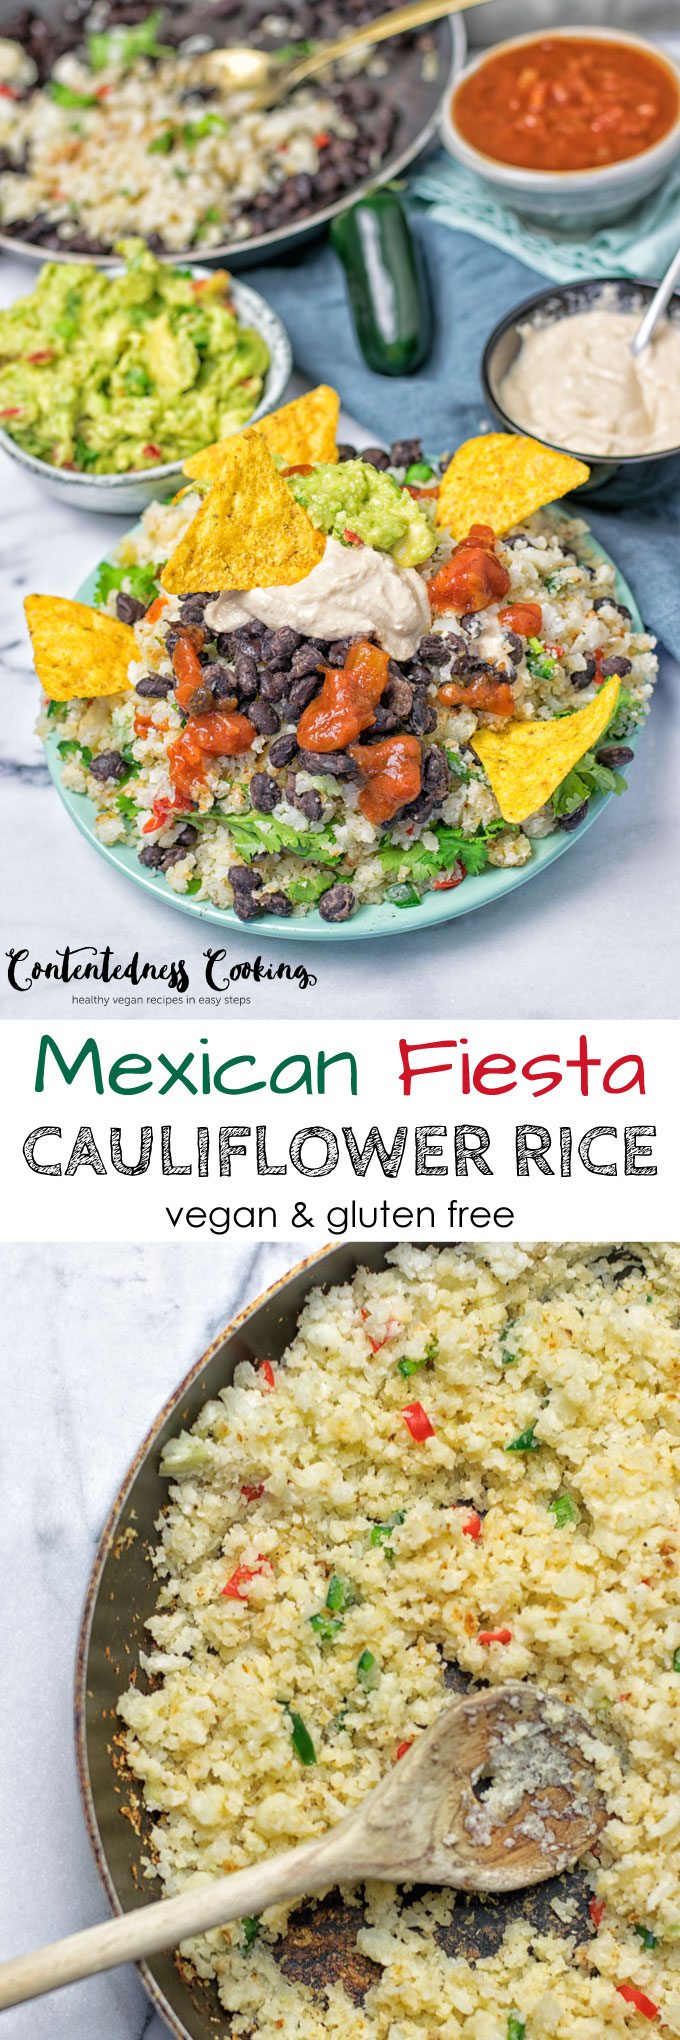 Collage of two pictures of the Mexican Fiesta Cauliflower Rice with recipe title text.